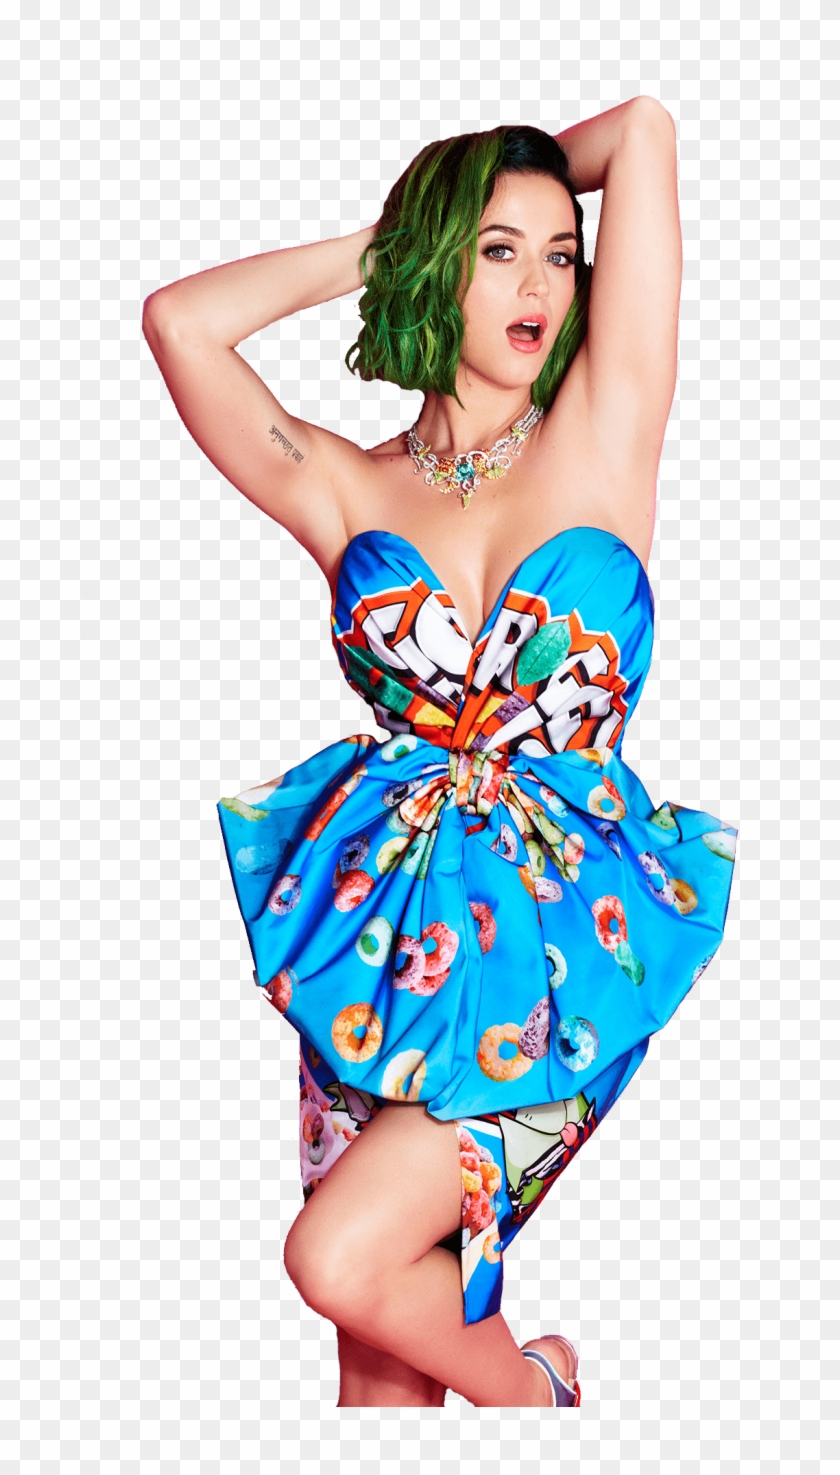 Blue Dress Katy Perry - Katy Perry Png Hd Clipart #699403